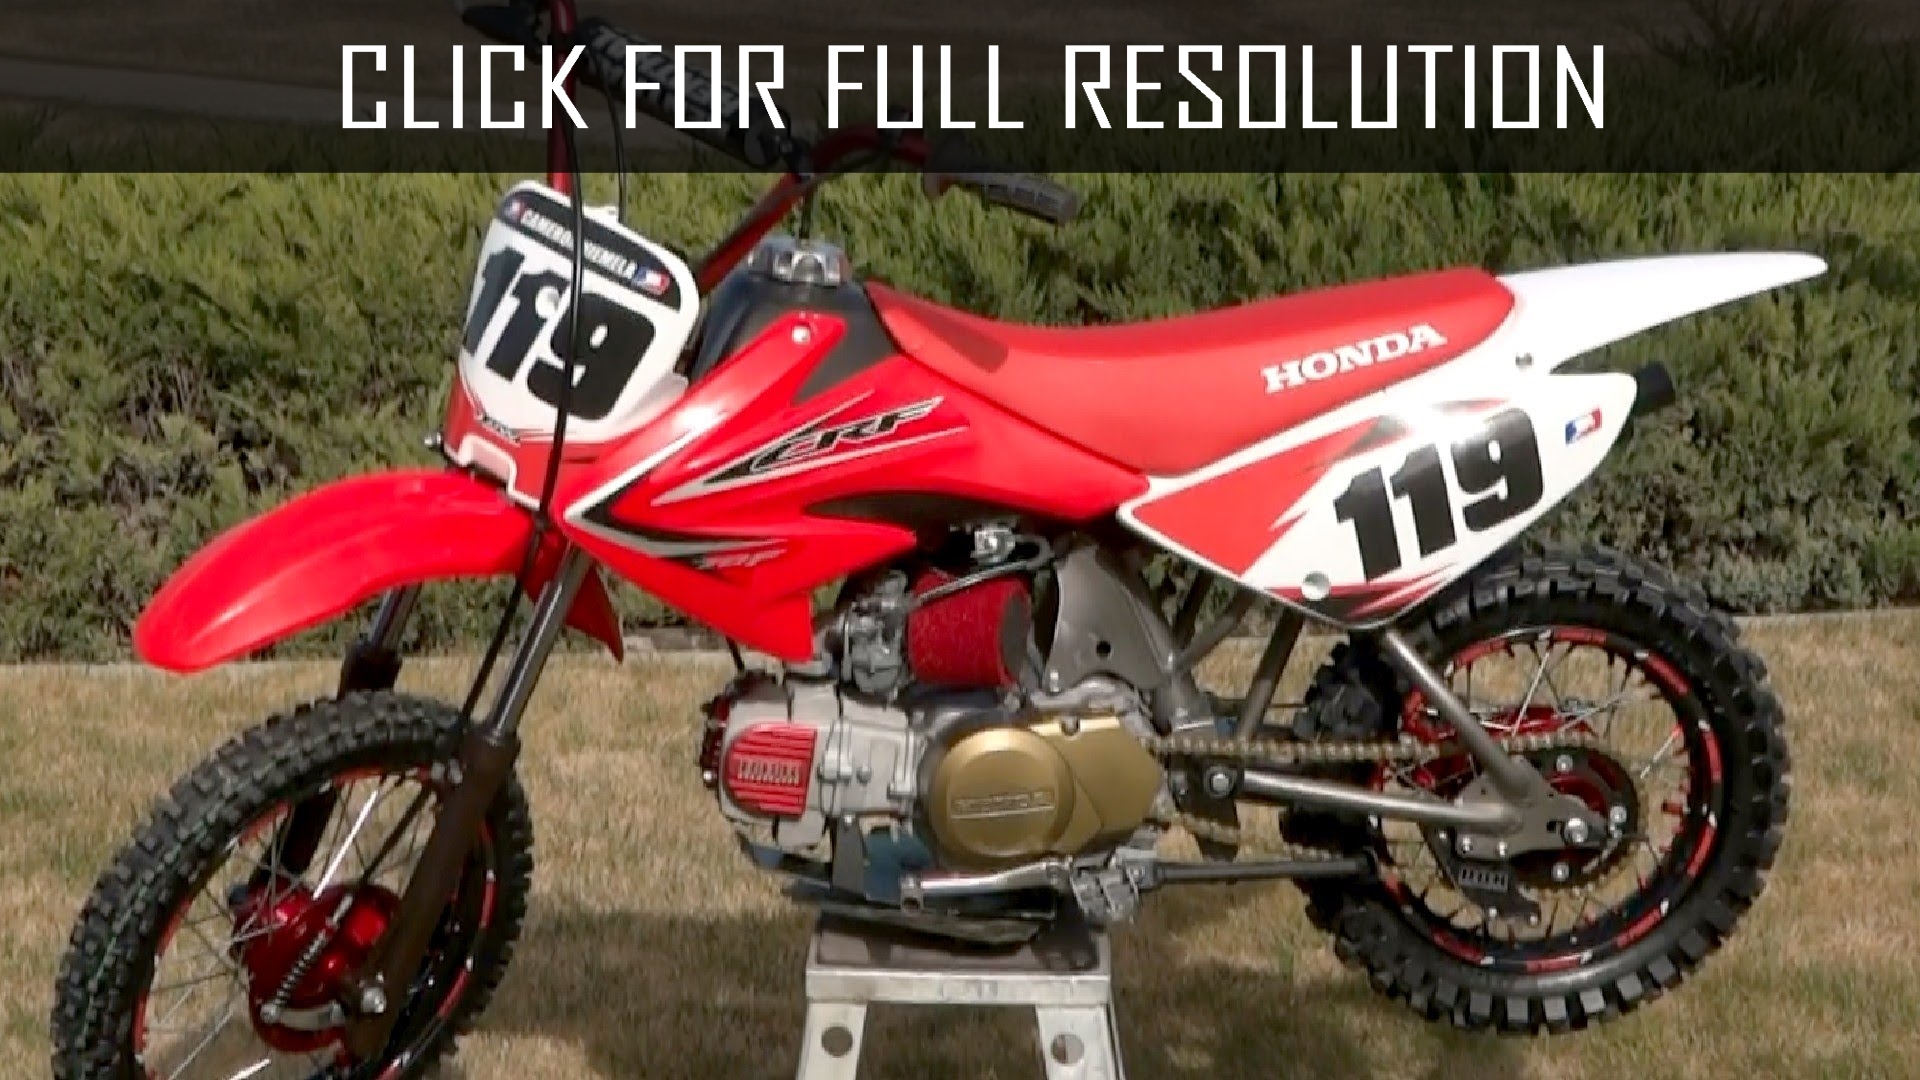 Honda Crf 70 Pit Bike - amazing photo gallery, some information and